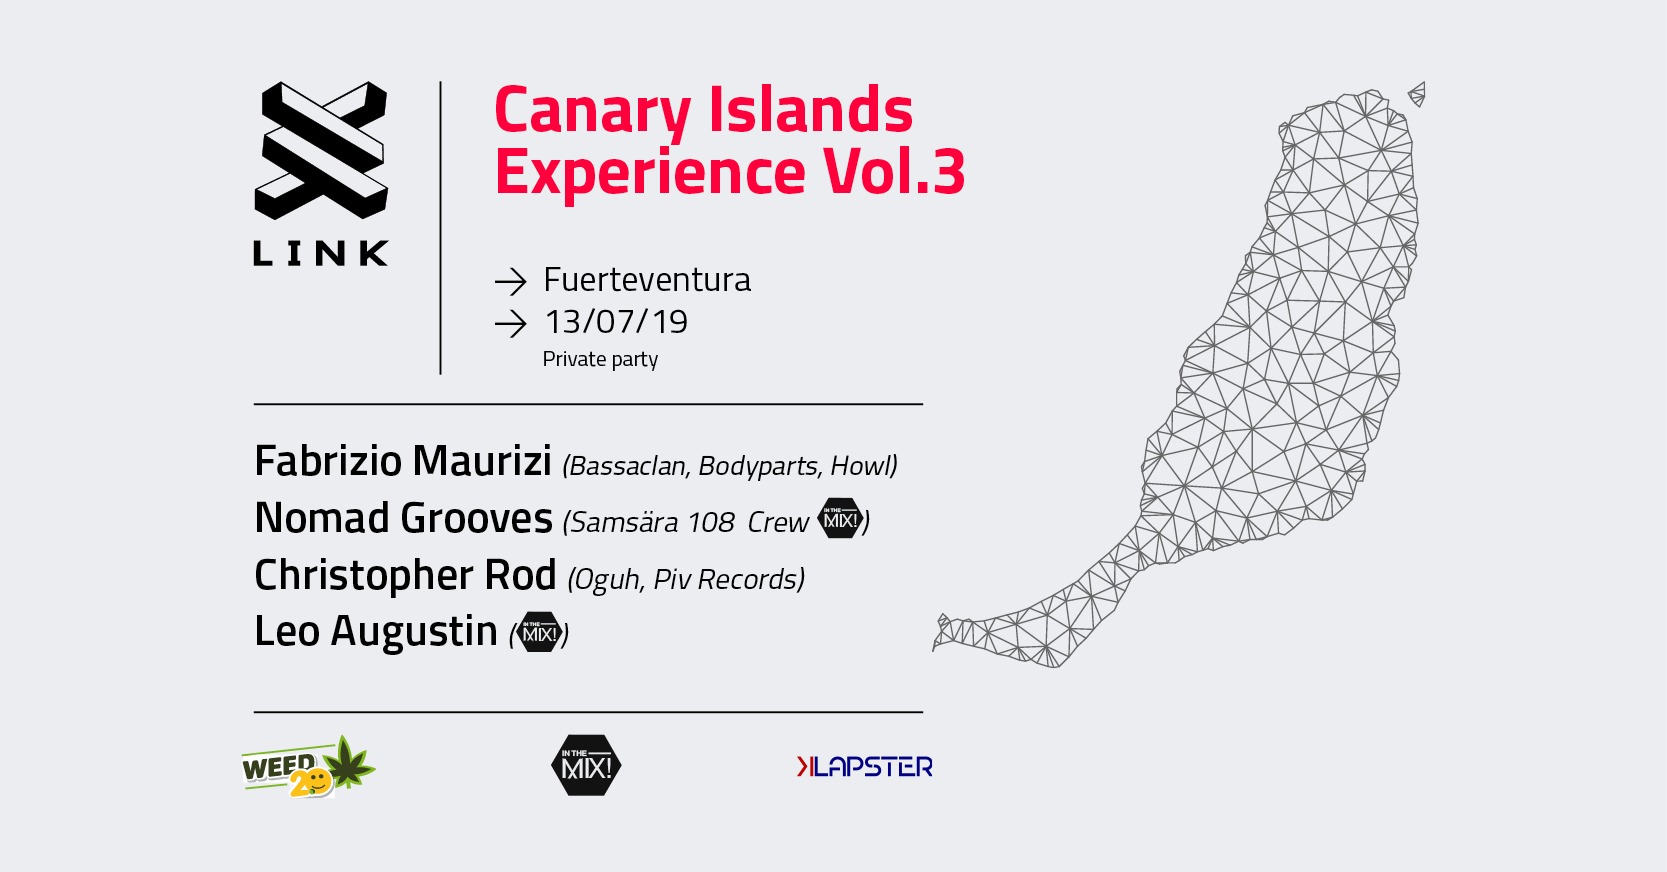 Canary Islands Experience VOL. 3